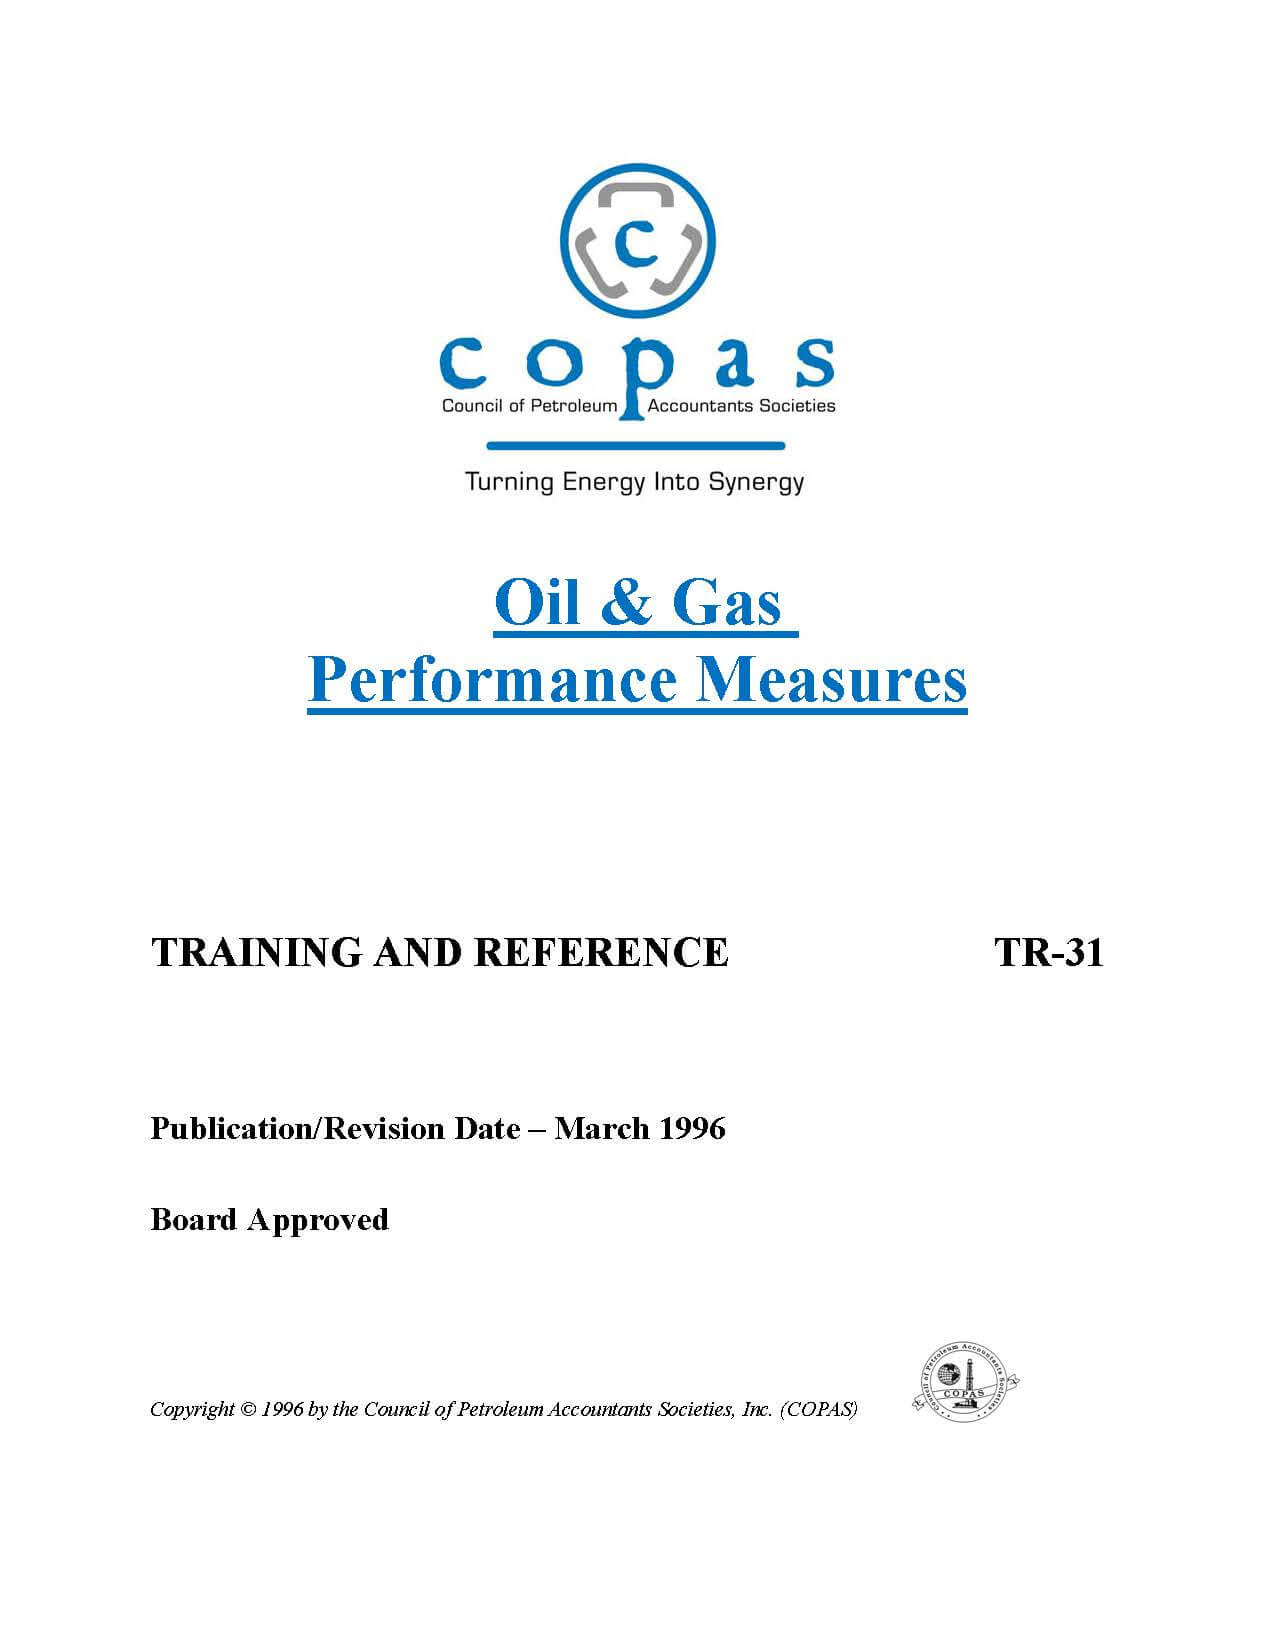 TR-31 Oil & Gas Performance Measures